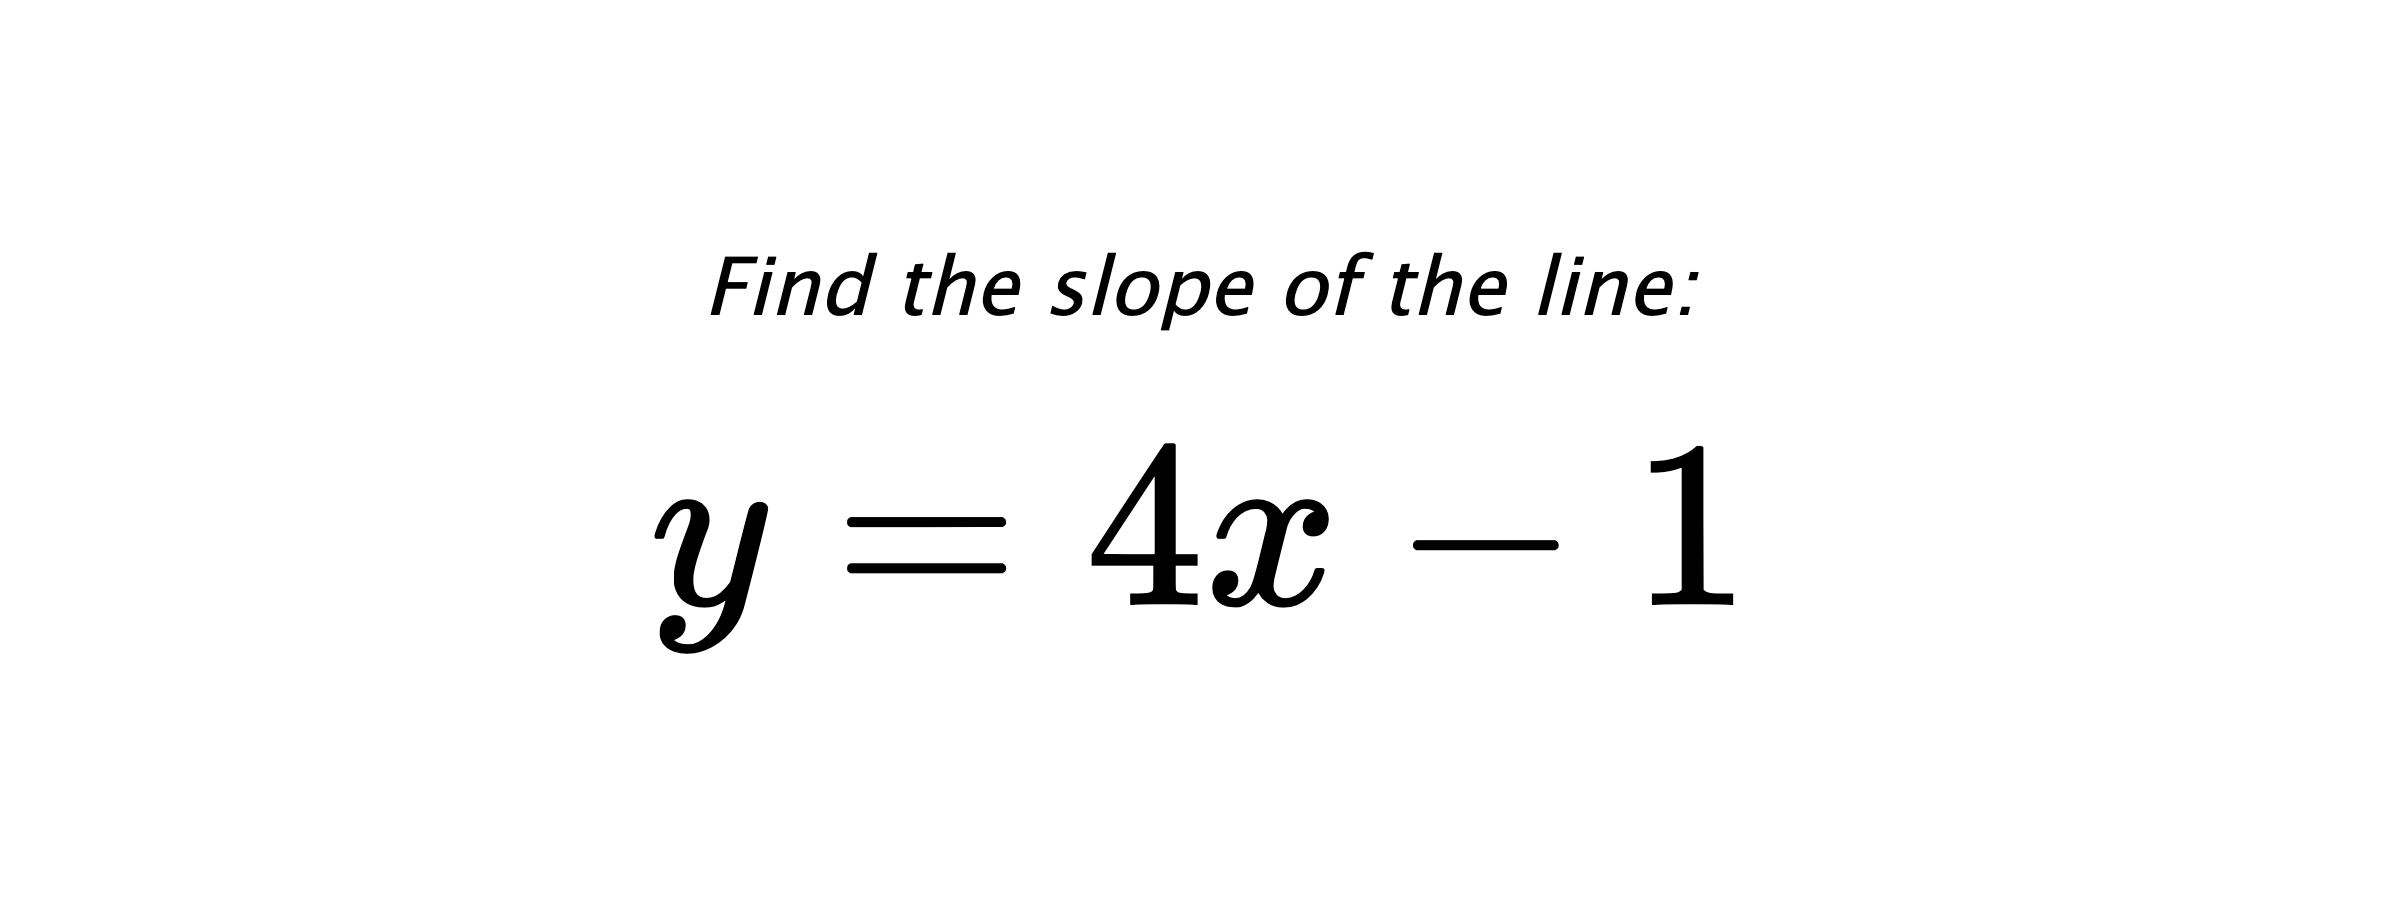 Find the slope of the line: $ y=4x-1 $